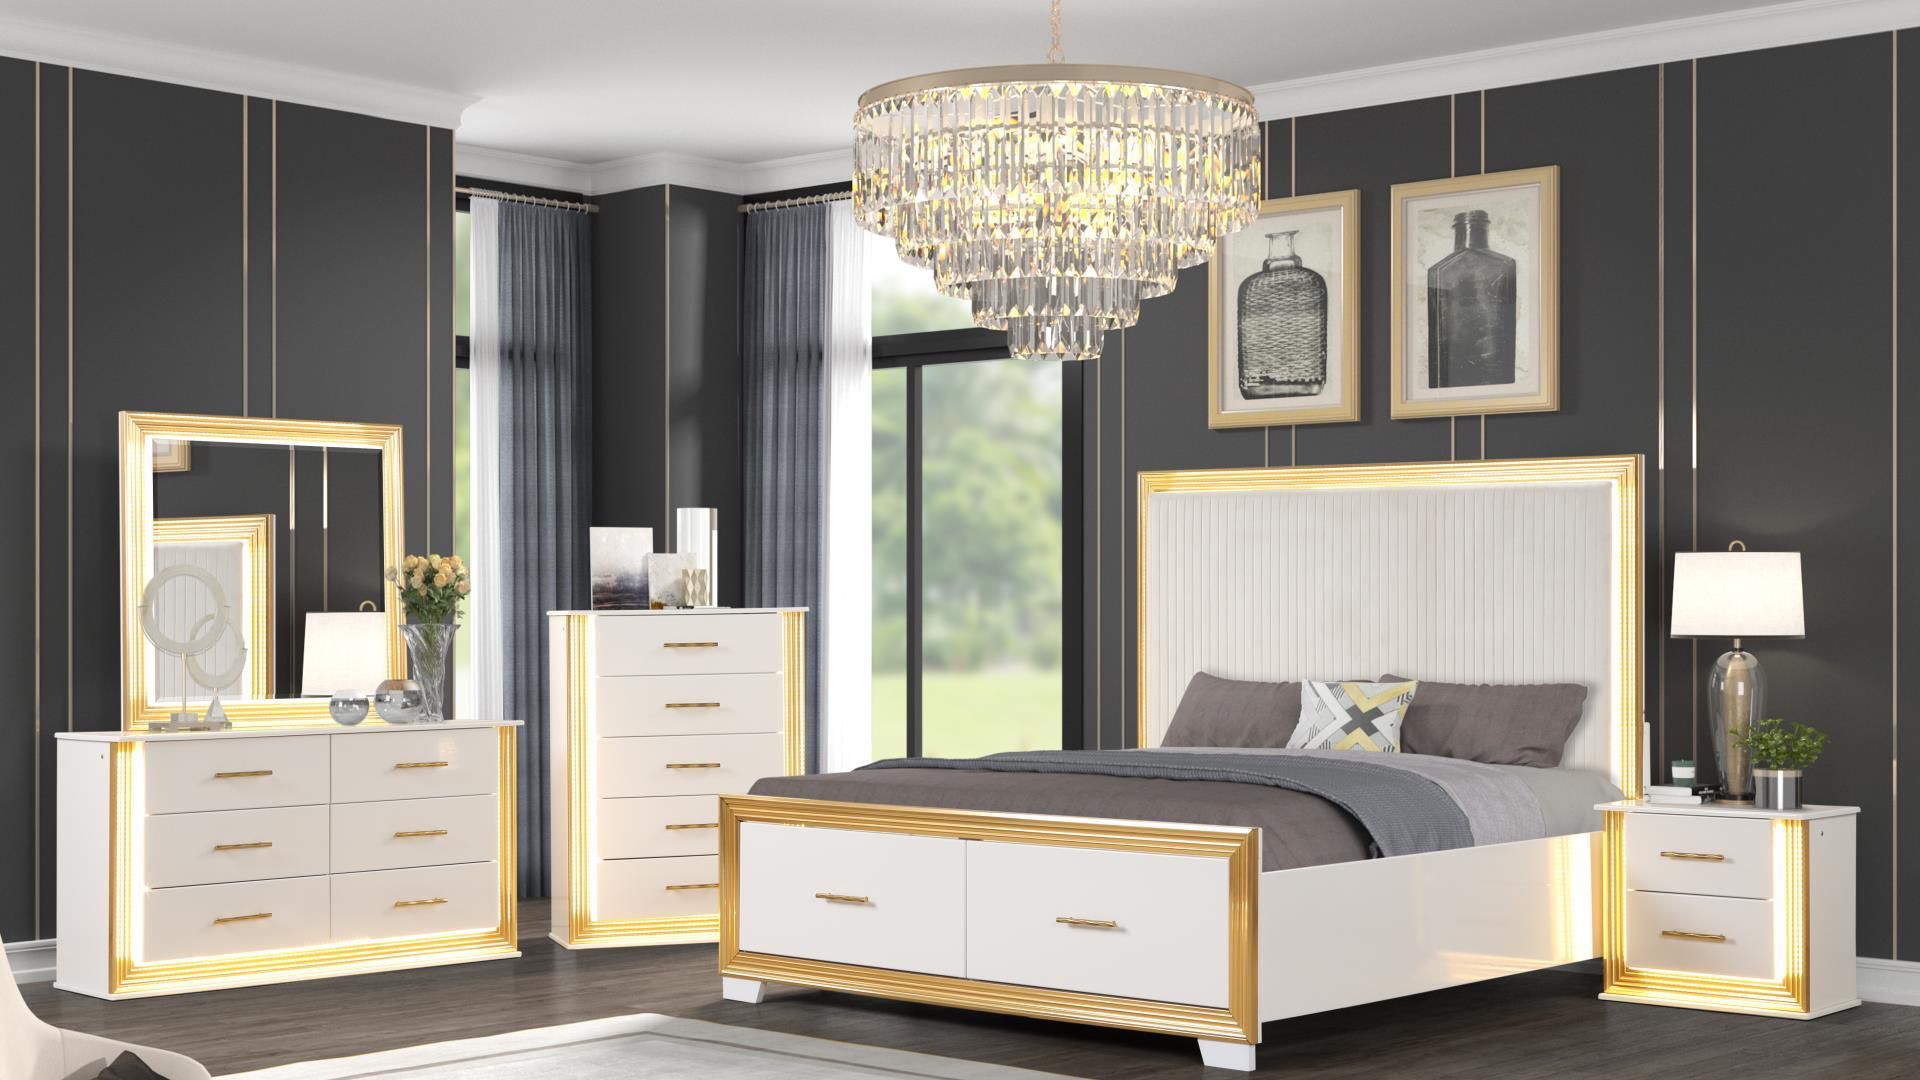 Elegant Bedroom Furniture In White And Gold With LED Lights And Storage Drawers Dresser Mirror Nighstand 